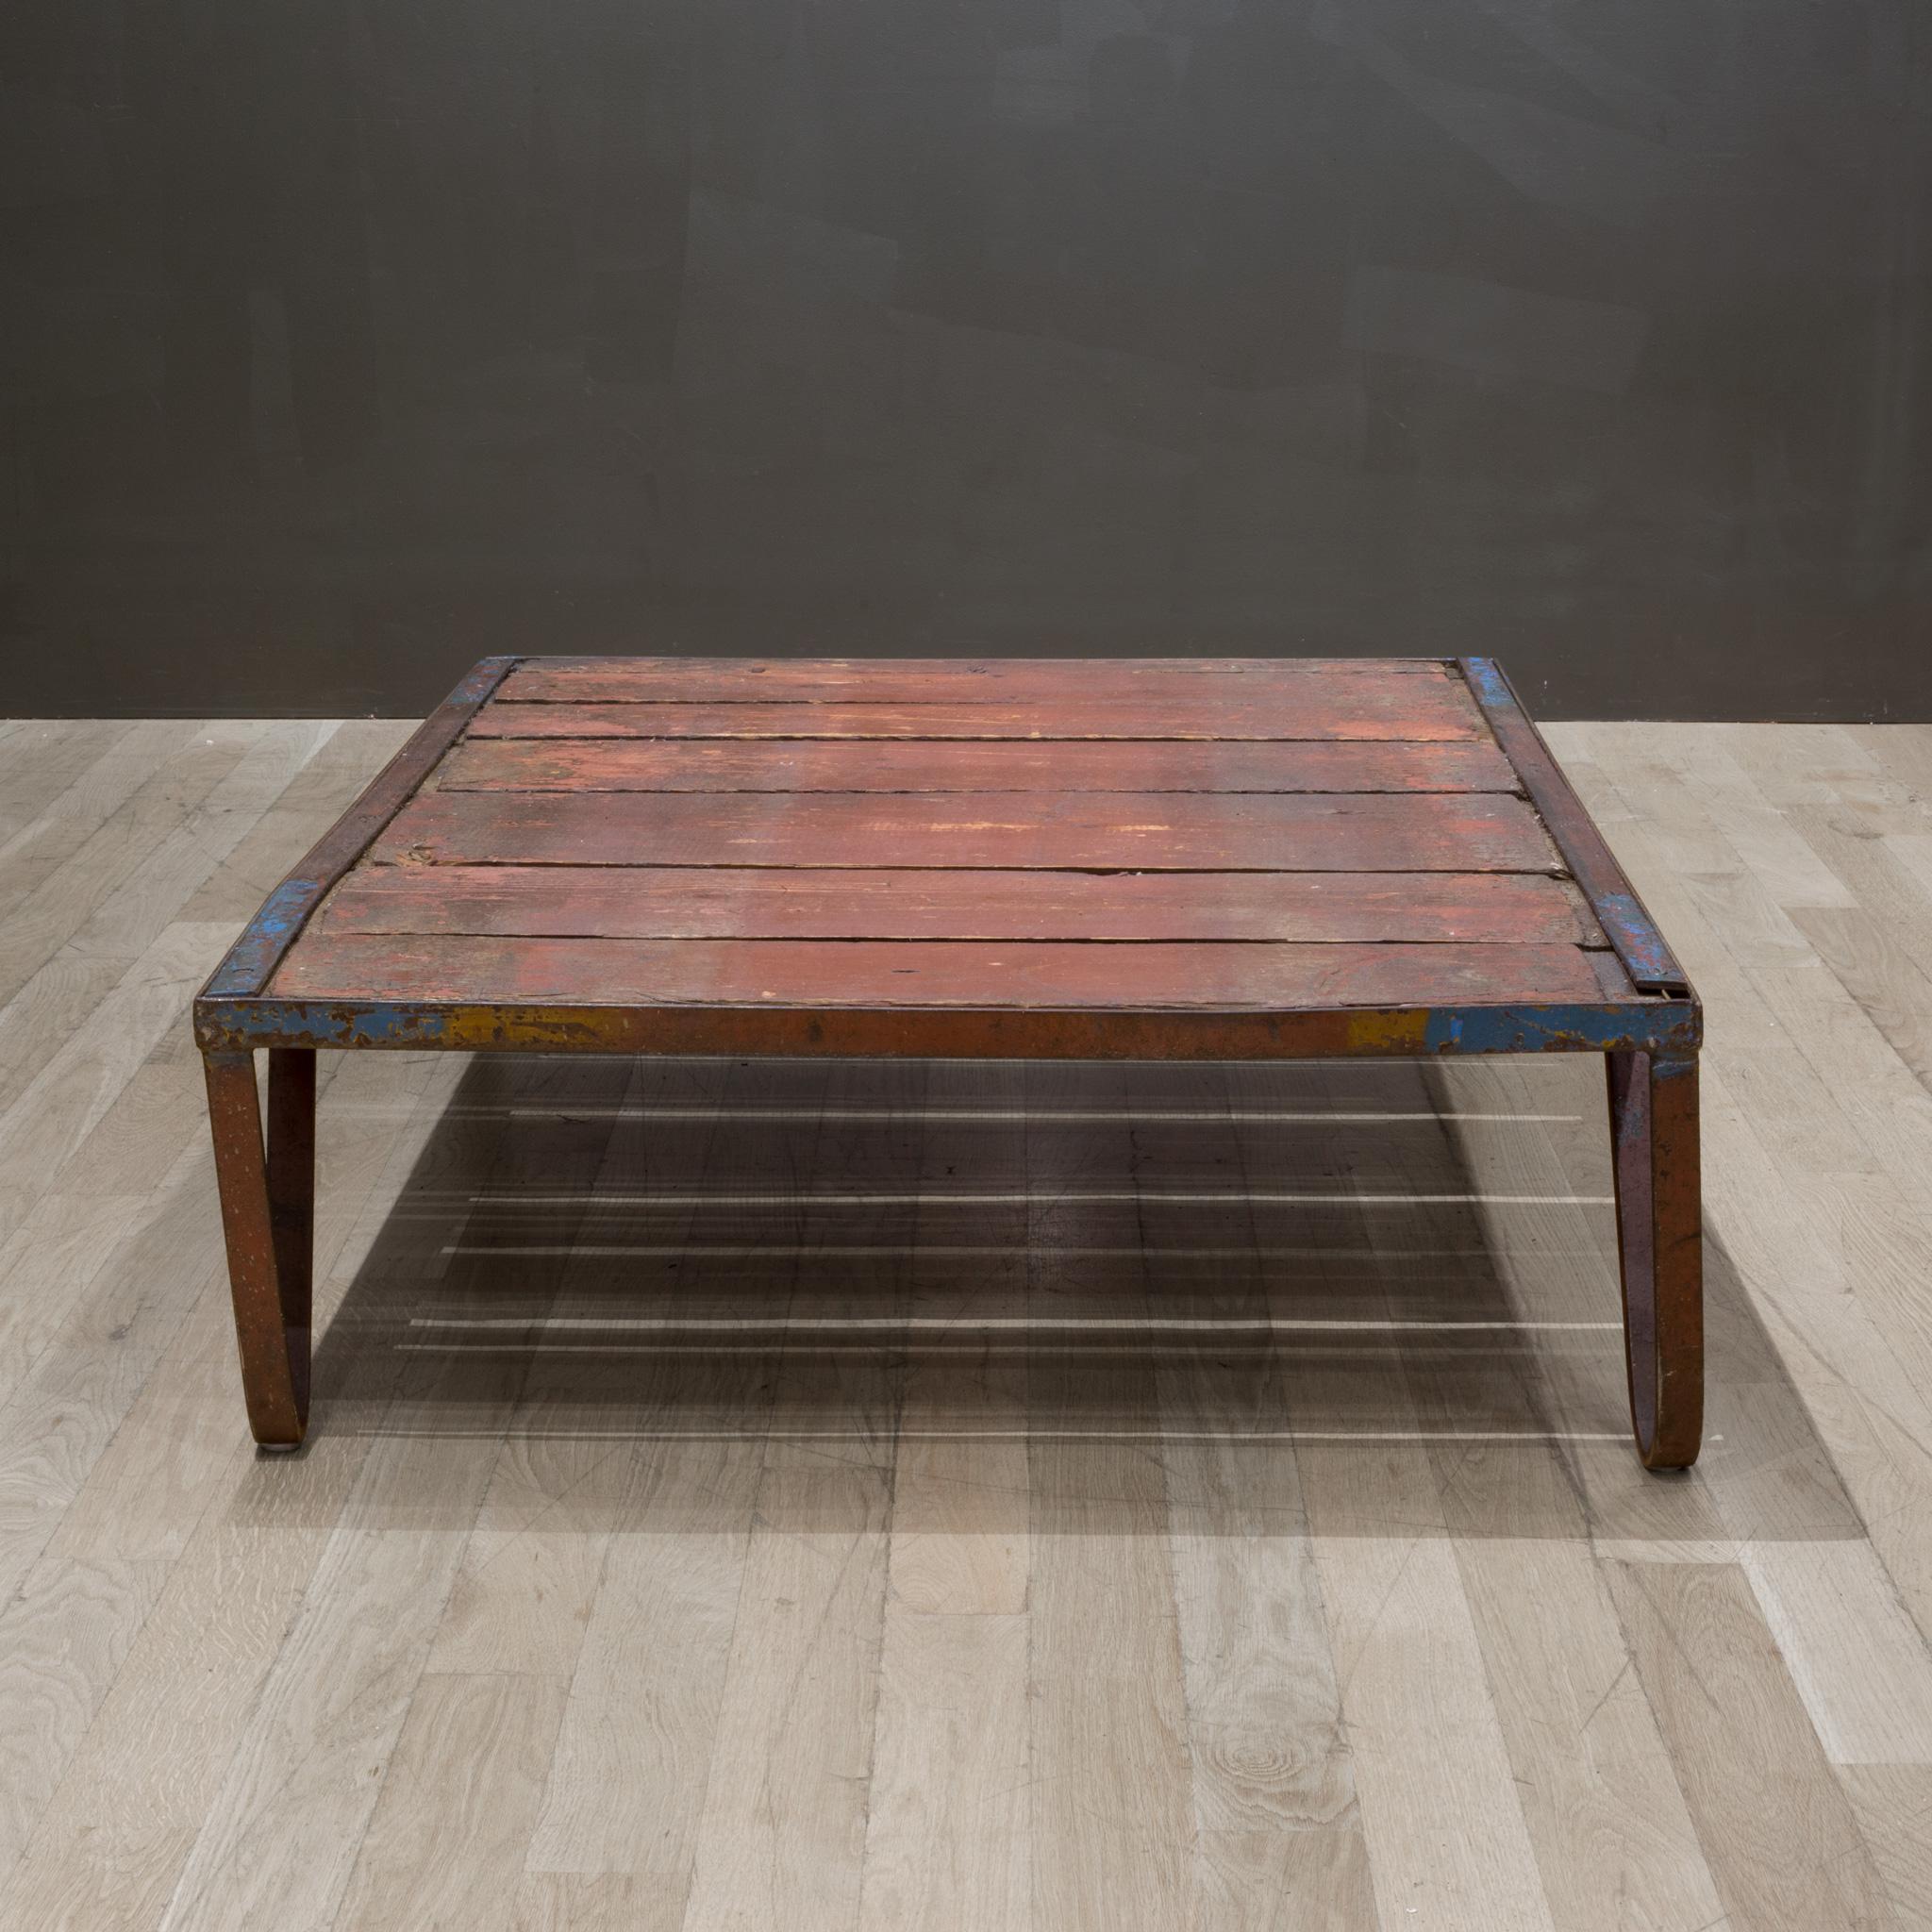 Early 20th c. Dutch Pallet Coffee Table, c.1940 For Sale 1